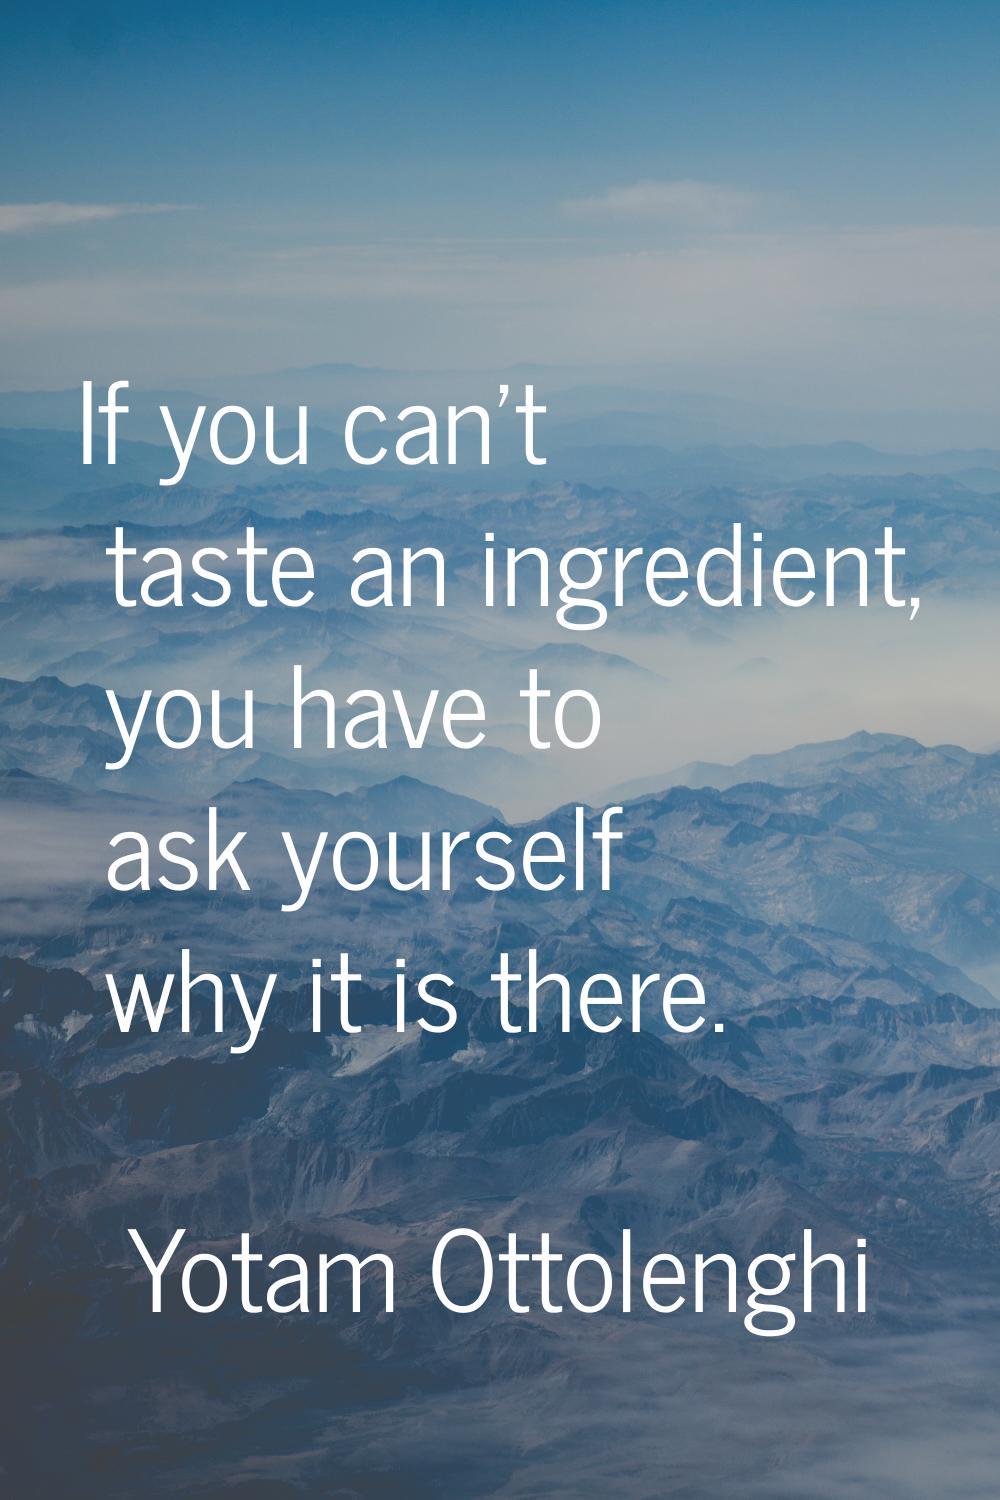 If you can't taste an ingredient, you have to ask yourself why it is there.